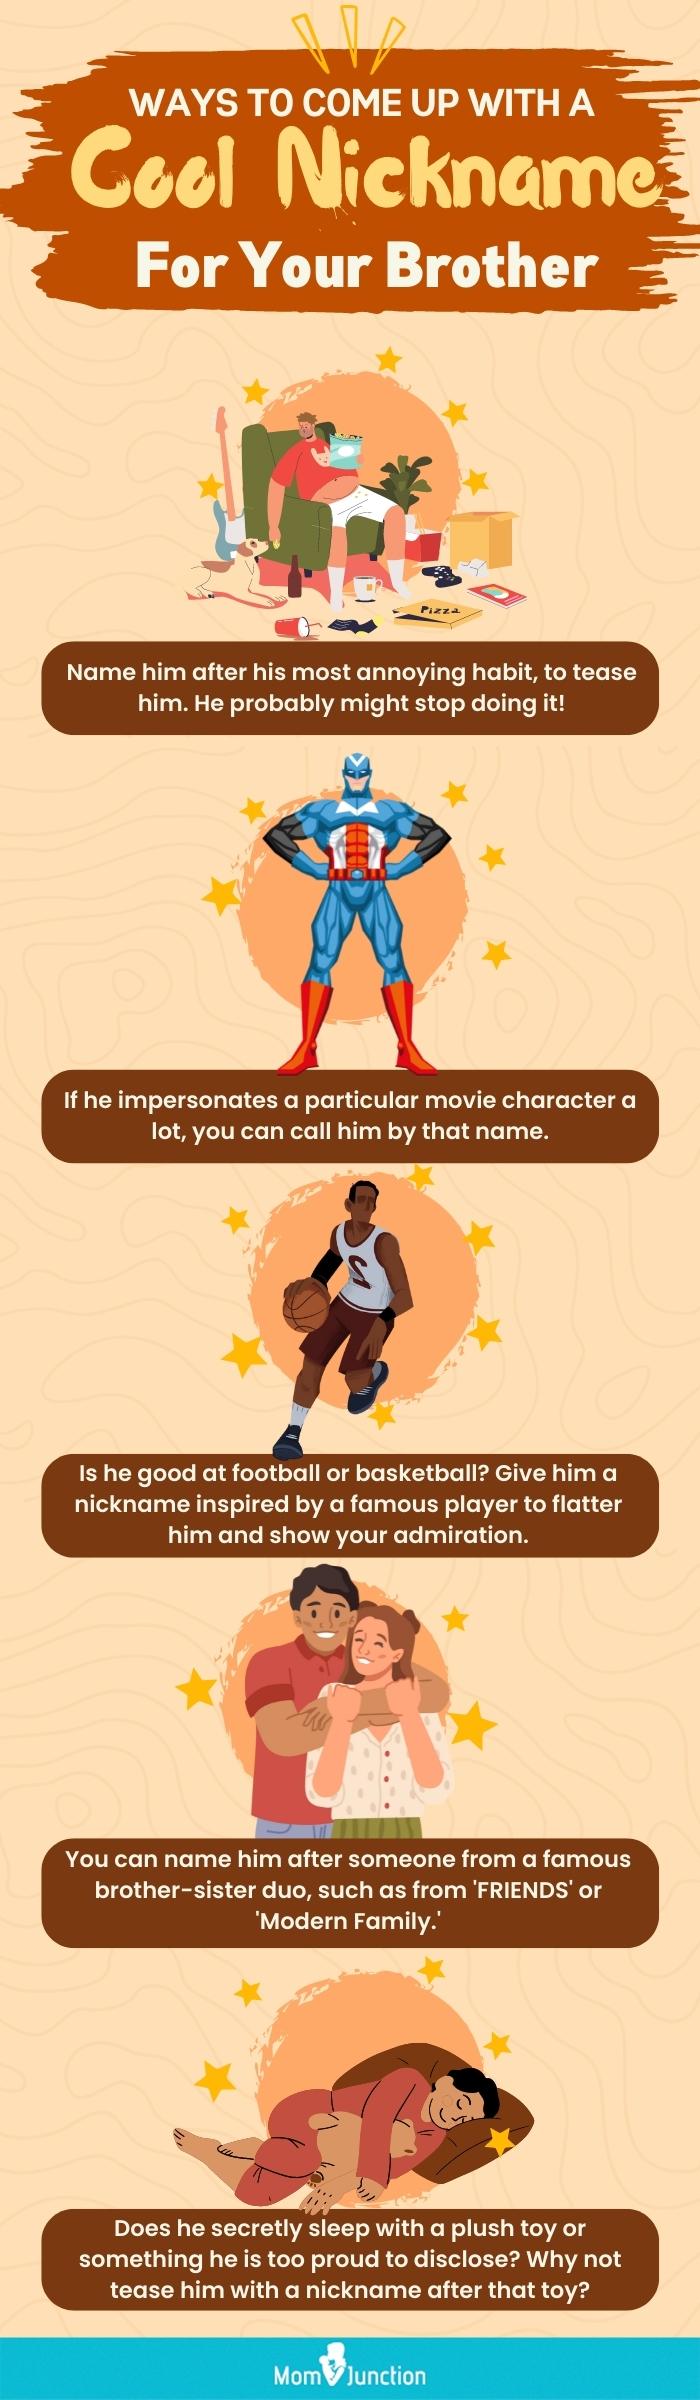 unique nickname for brothers (infographic)